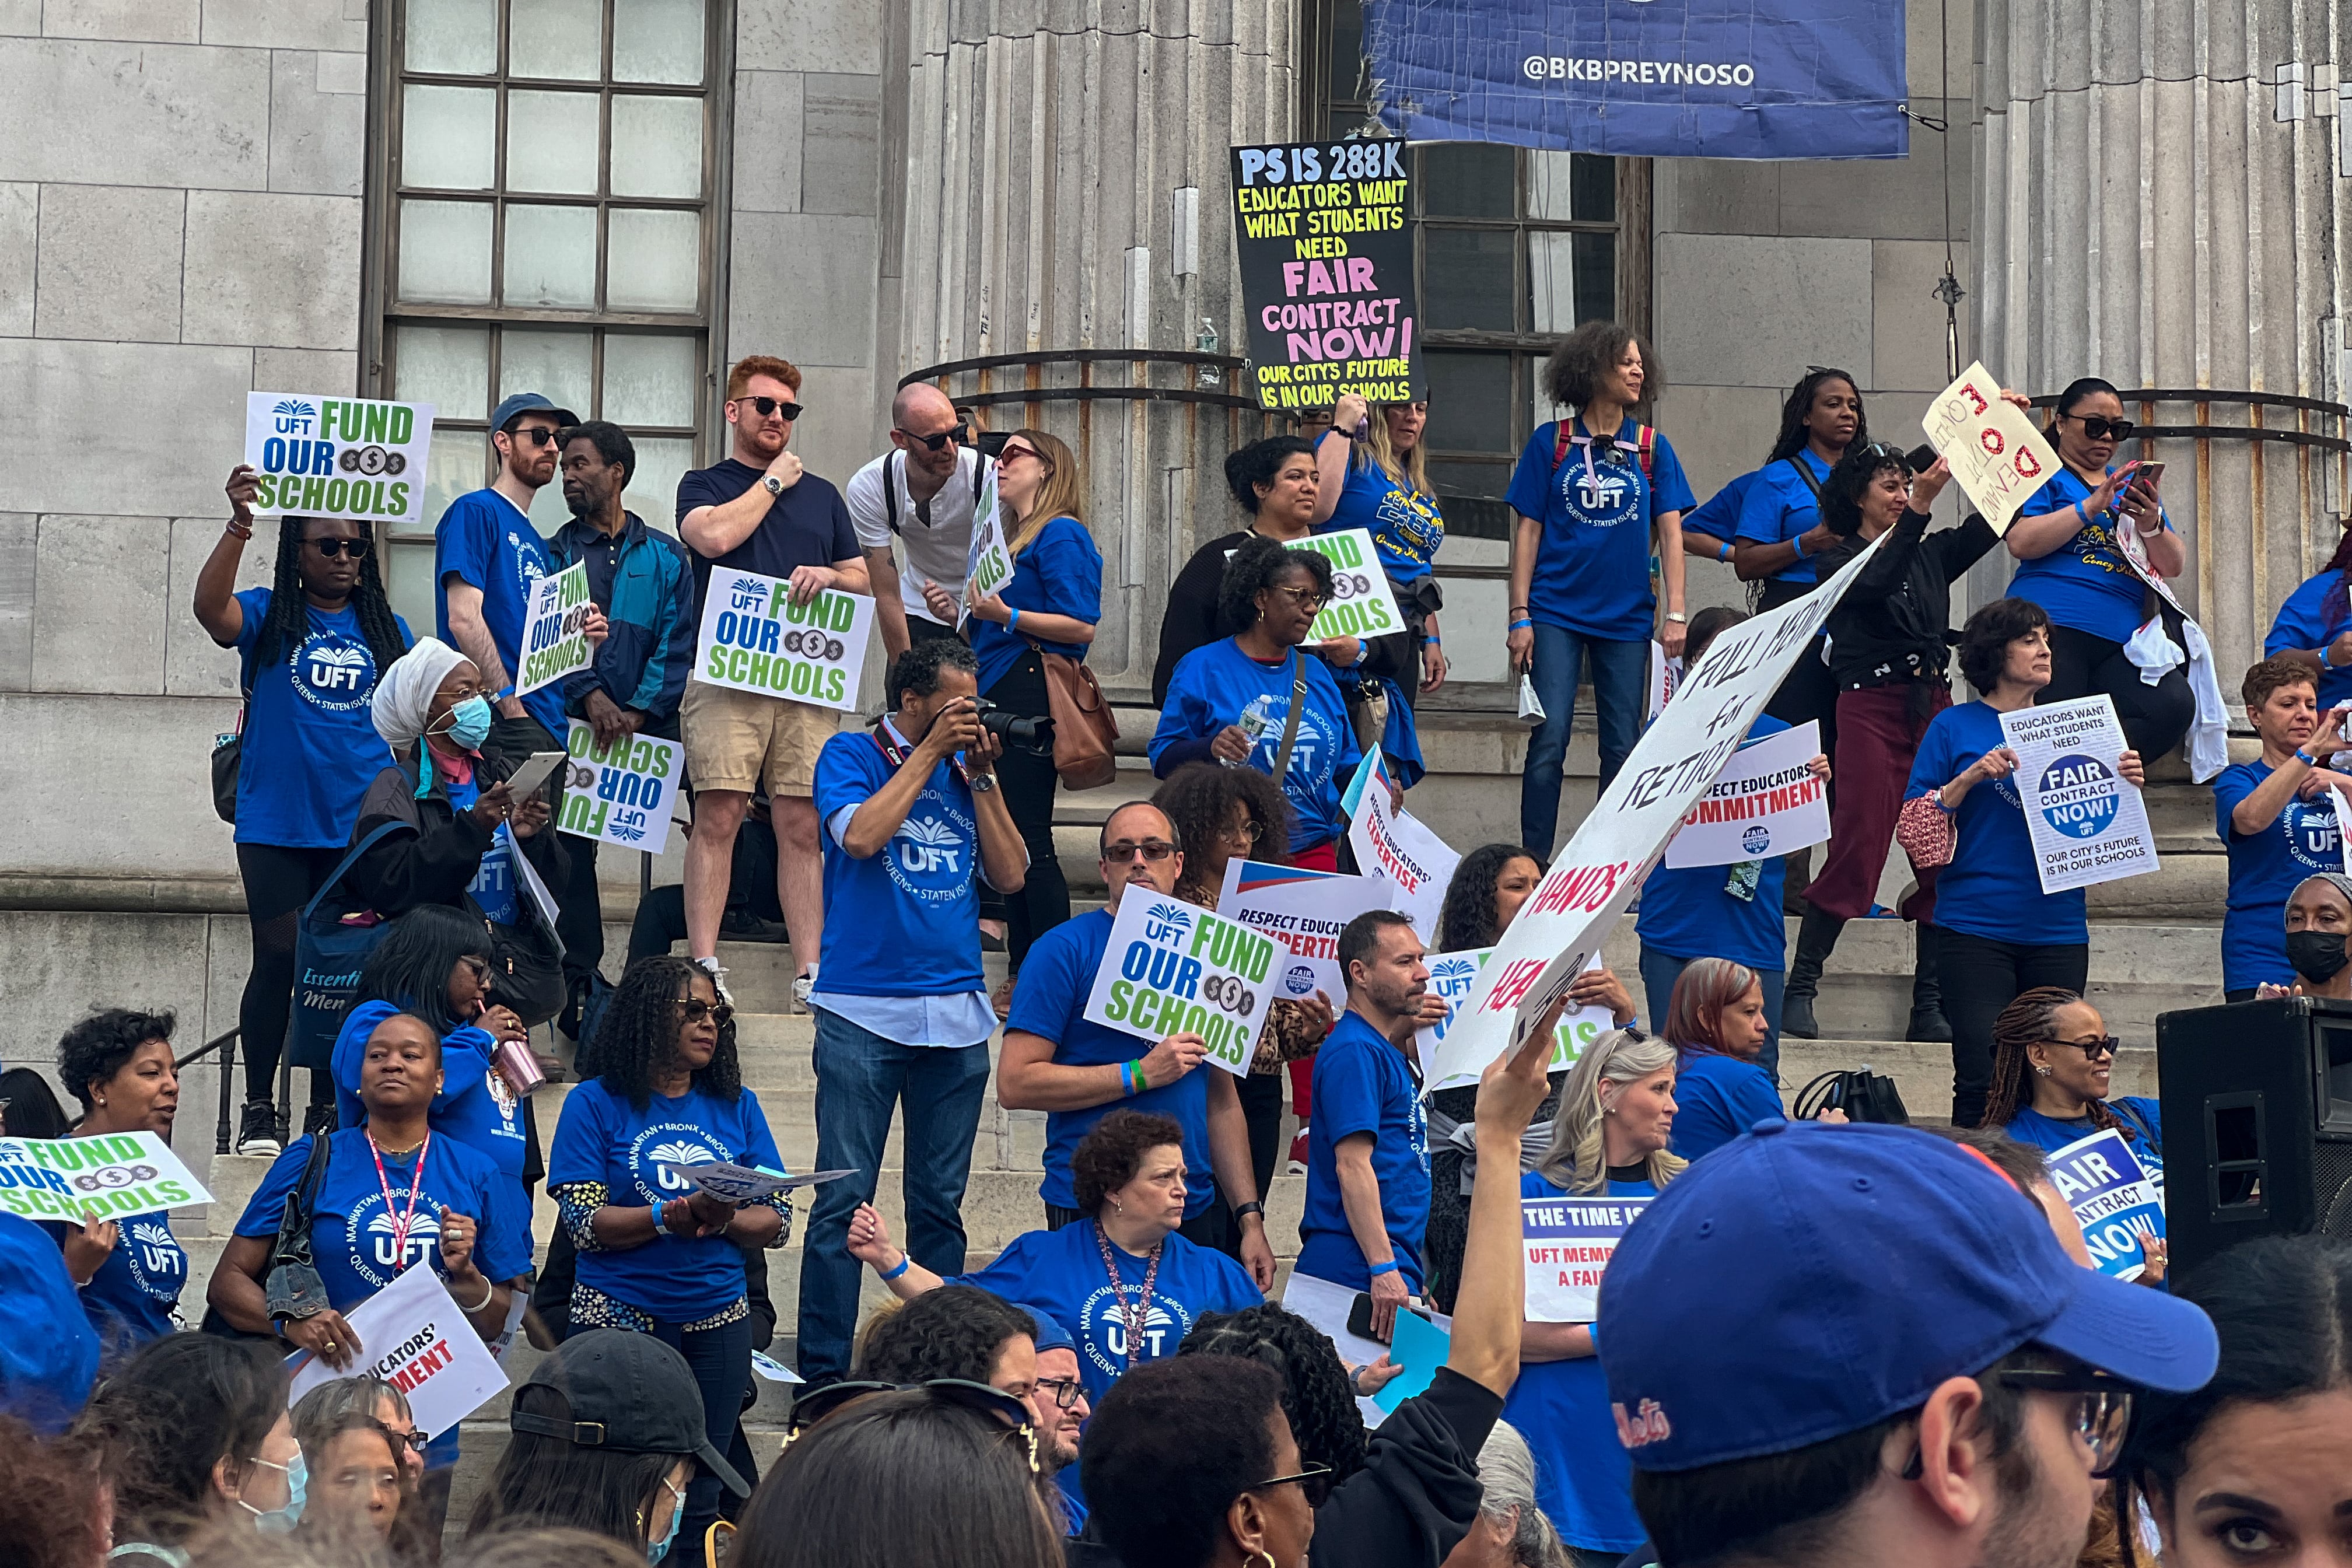 A group of people wearing bright blue T-shirts stand on the steps holding signs for a fair contract. 